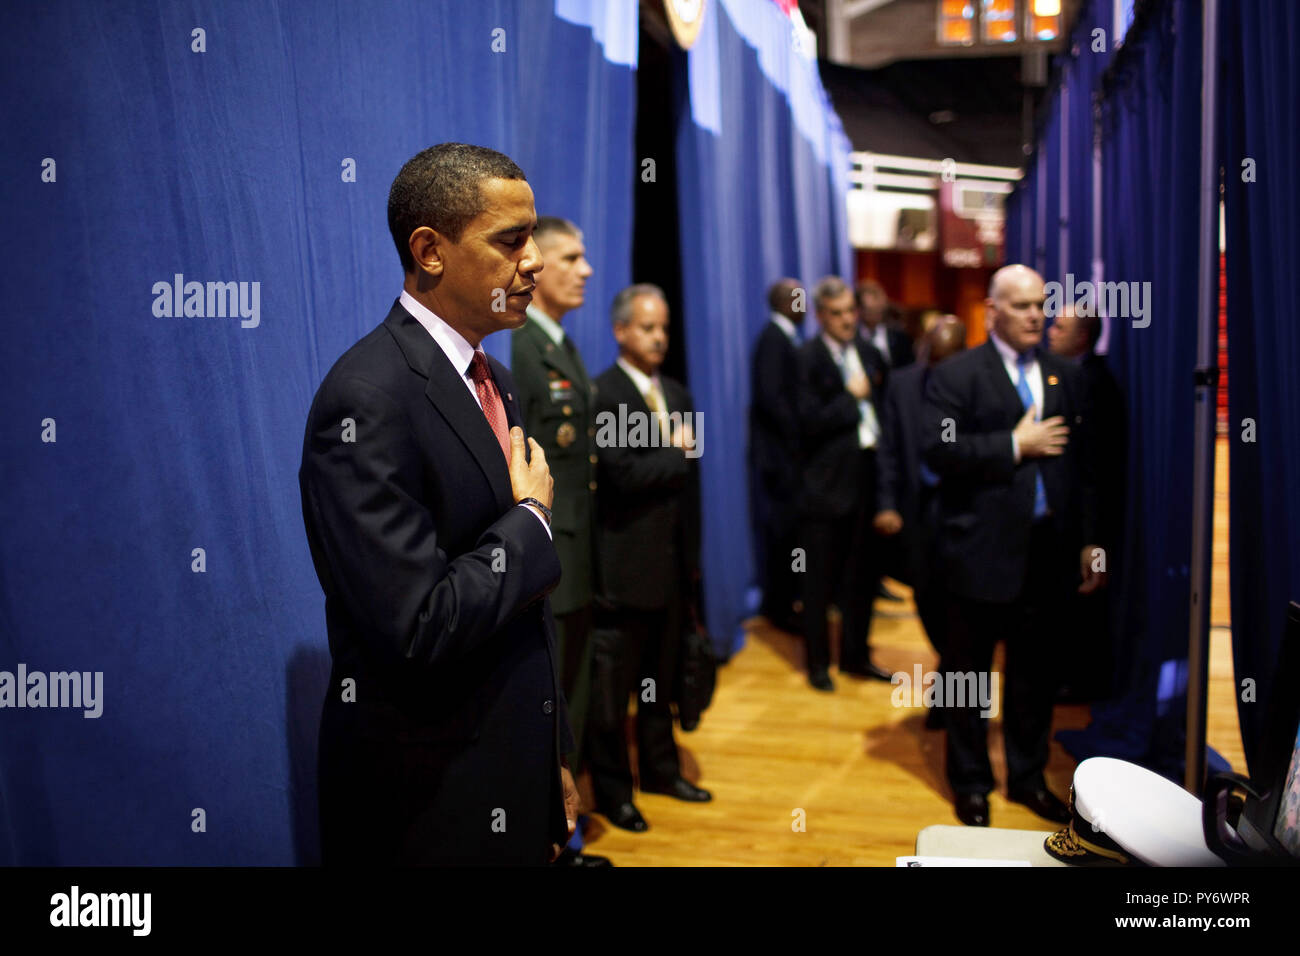 Before giving a policy speech on Iraq, President Barack Obama places his hand on his heart as the national anthem is played backstage  at the Field House, Camp Lejeune, North Carolina 2/27/09.  Official White House Photo by Pete Souza Stock Photo